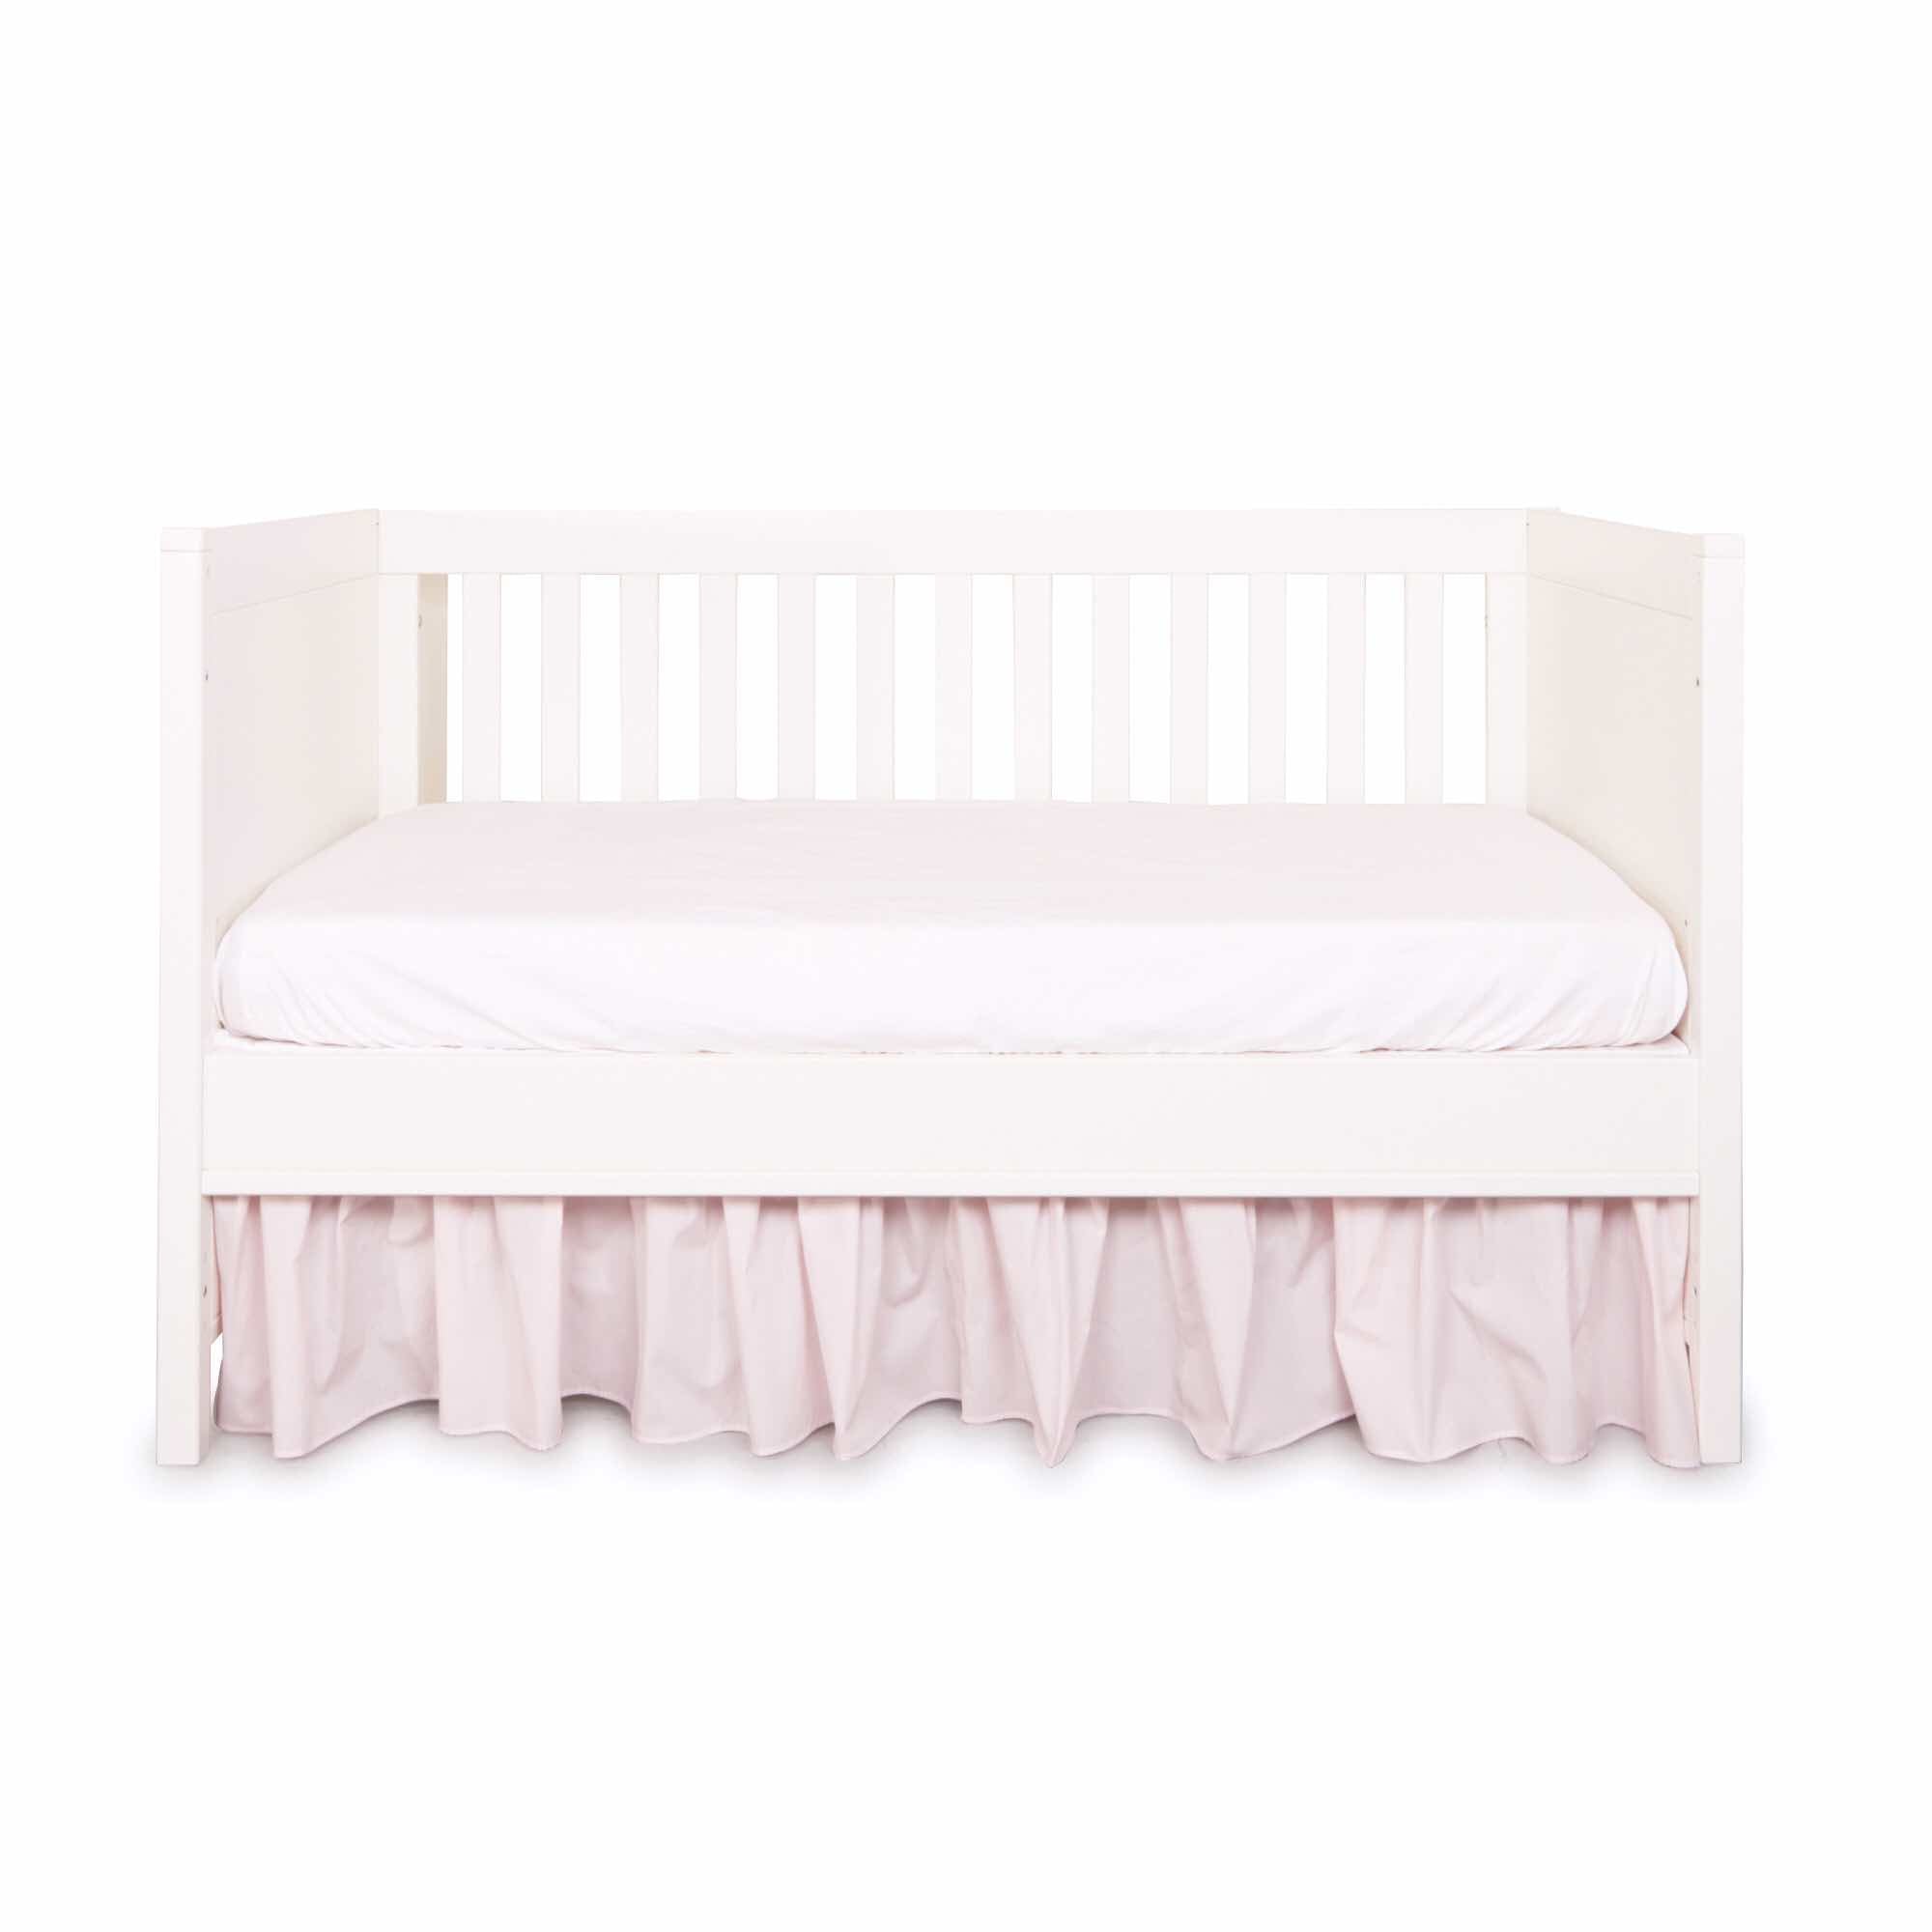 Theophile & Patachou Bed Skirt 60cm - Royal Pink